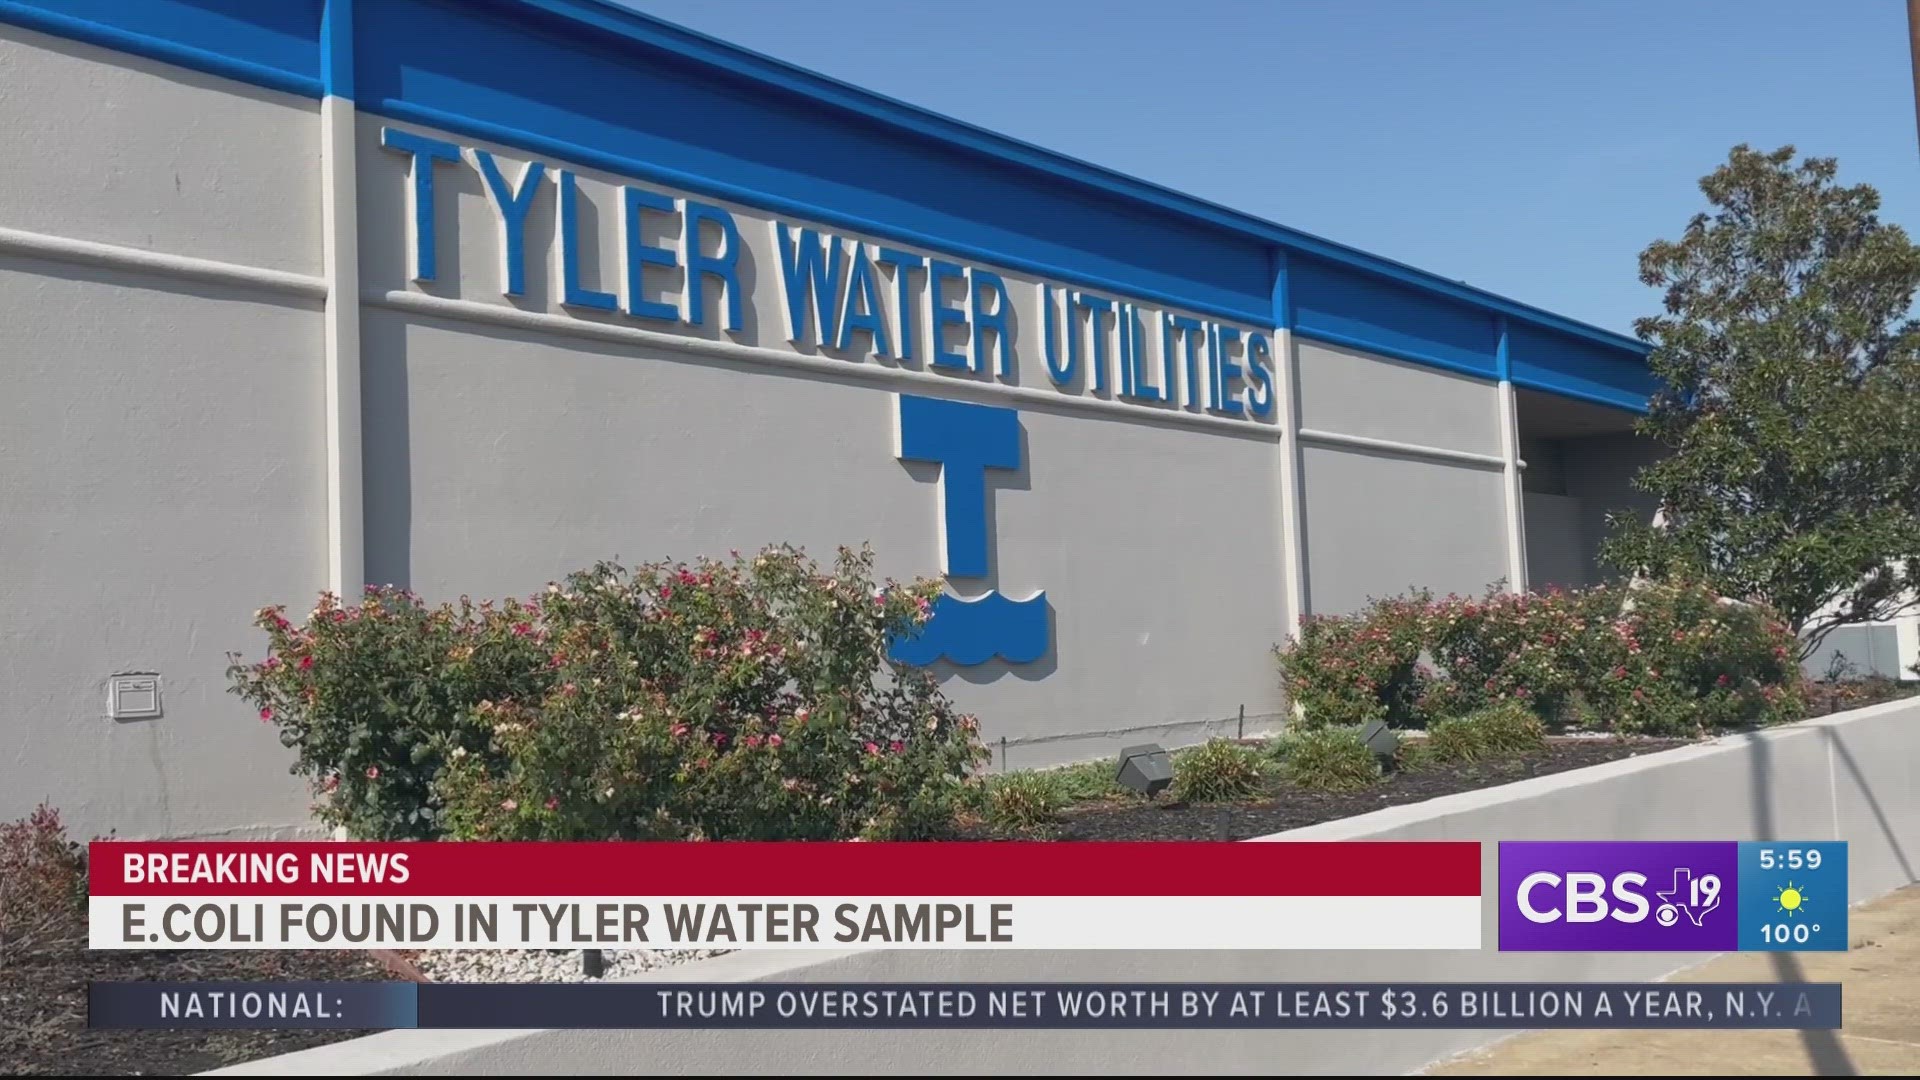 The city of Tyler said there is currently no timeline for rescinding the notice, but TWU customers should brace for at least 24 hours.